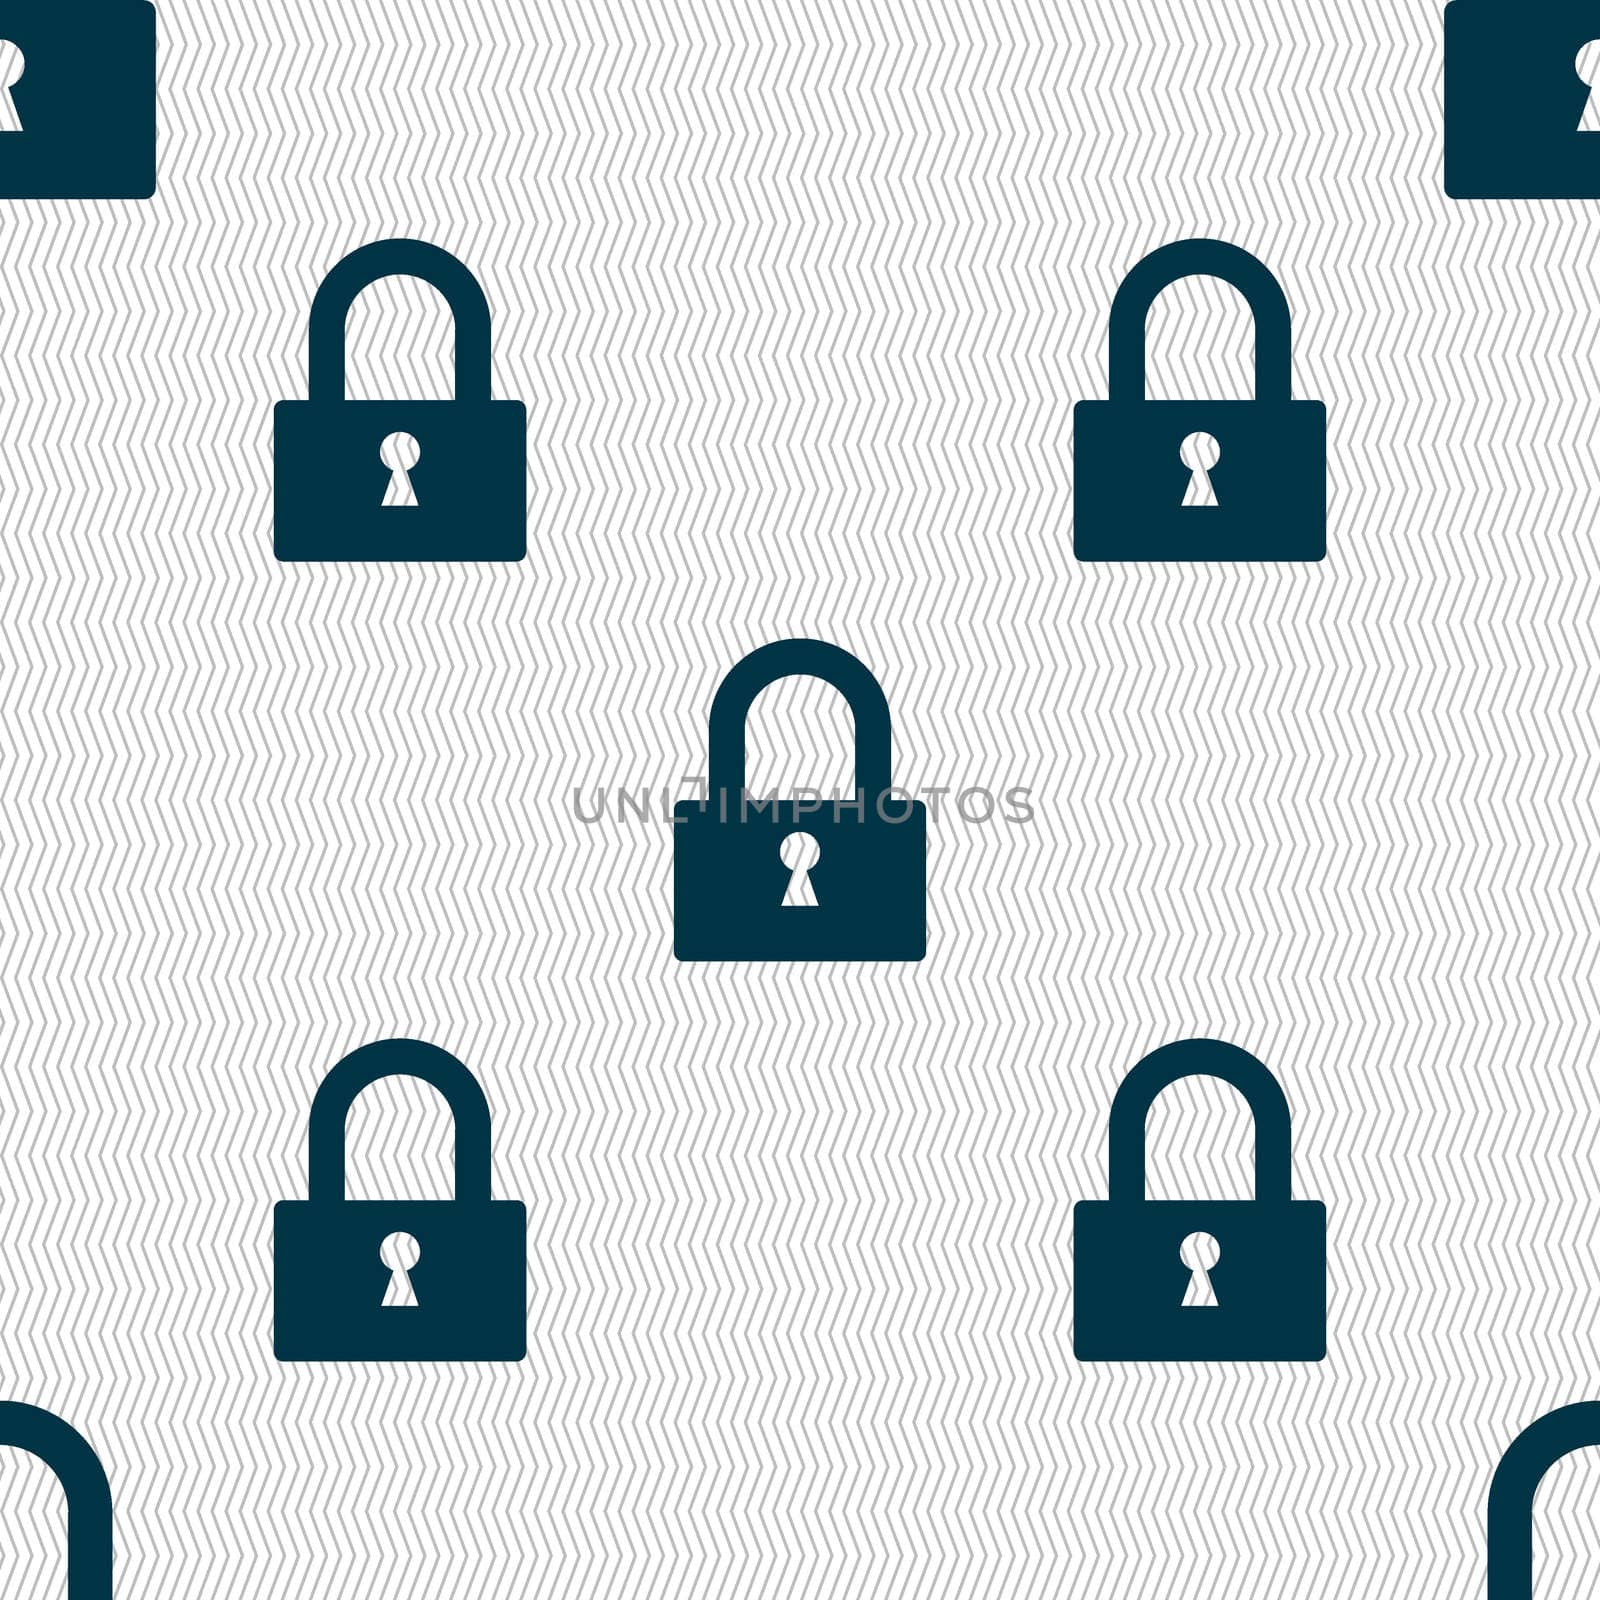 Lock sign icon. Locker symbol. Seamless abstract background with geometric shapes. illustration